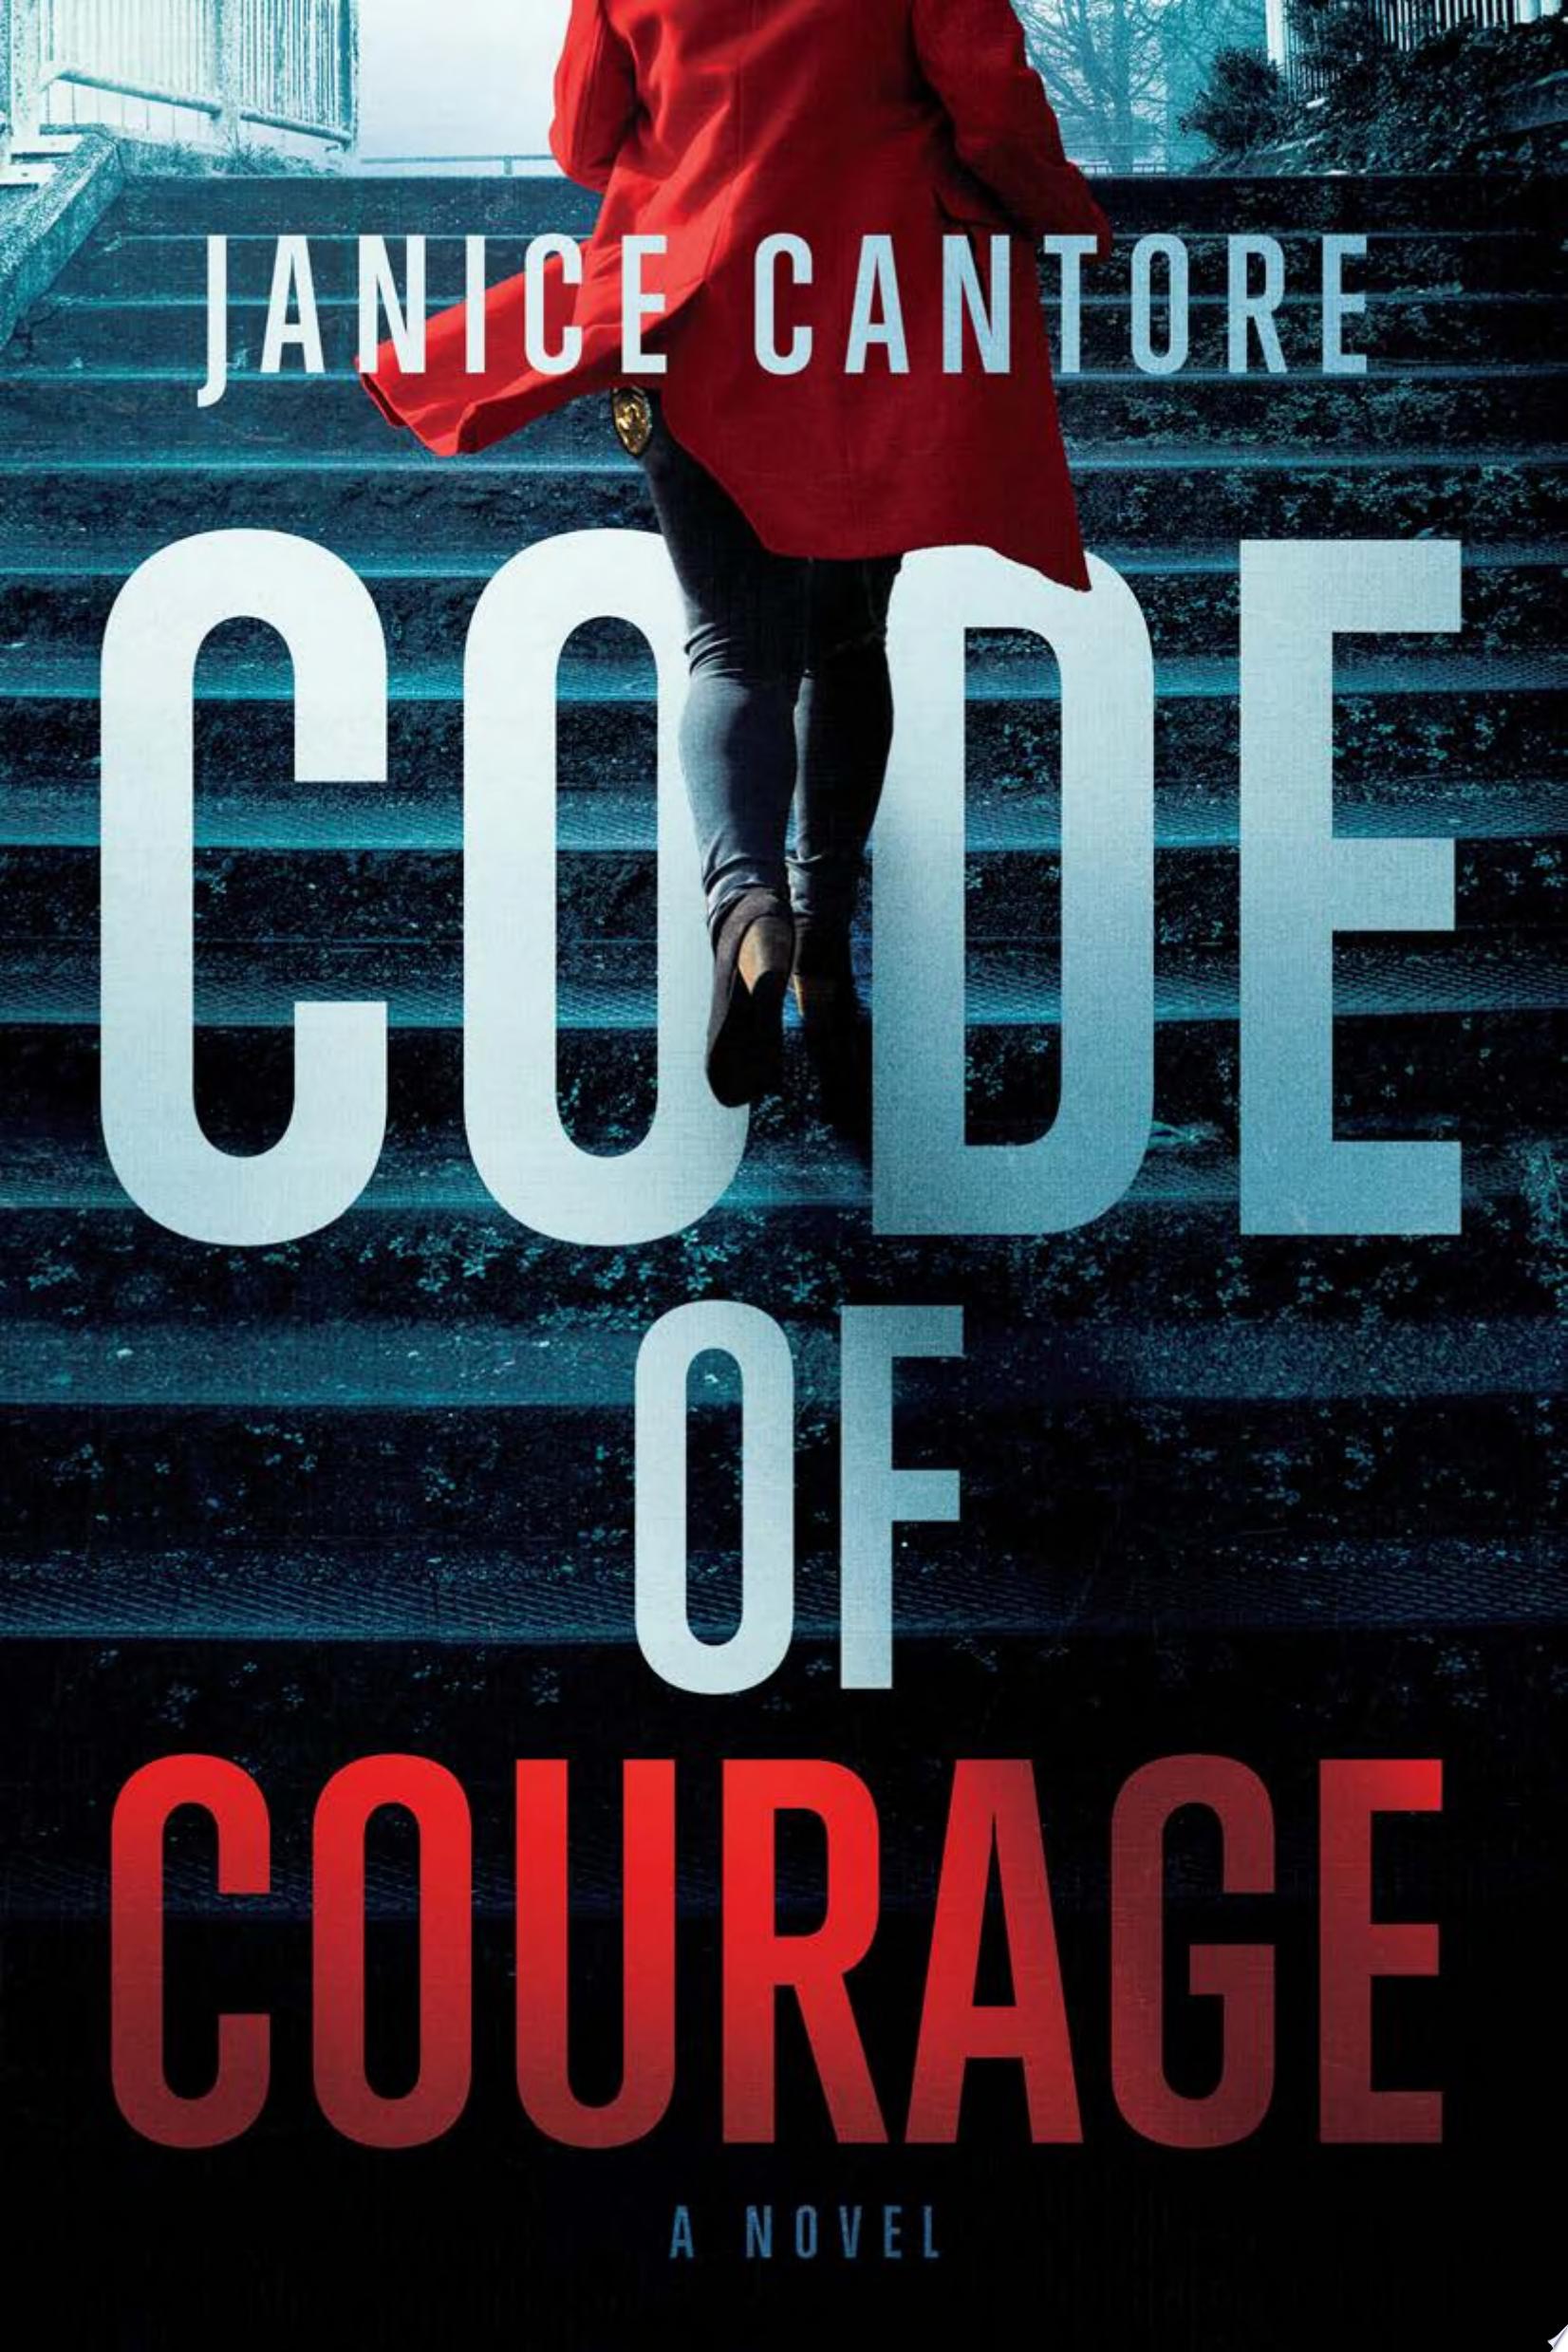 Image for "Code of Courage"